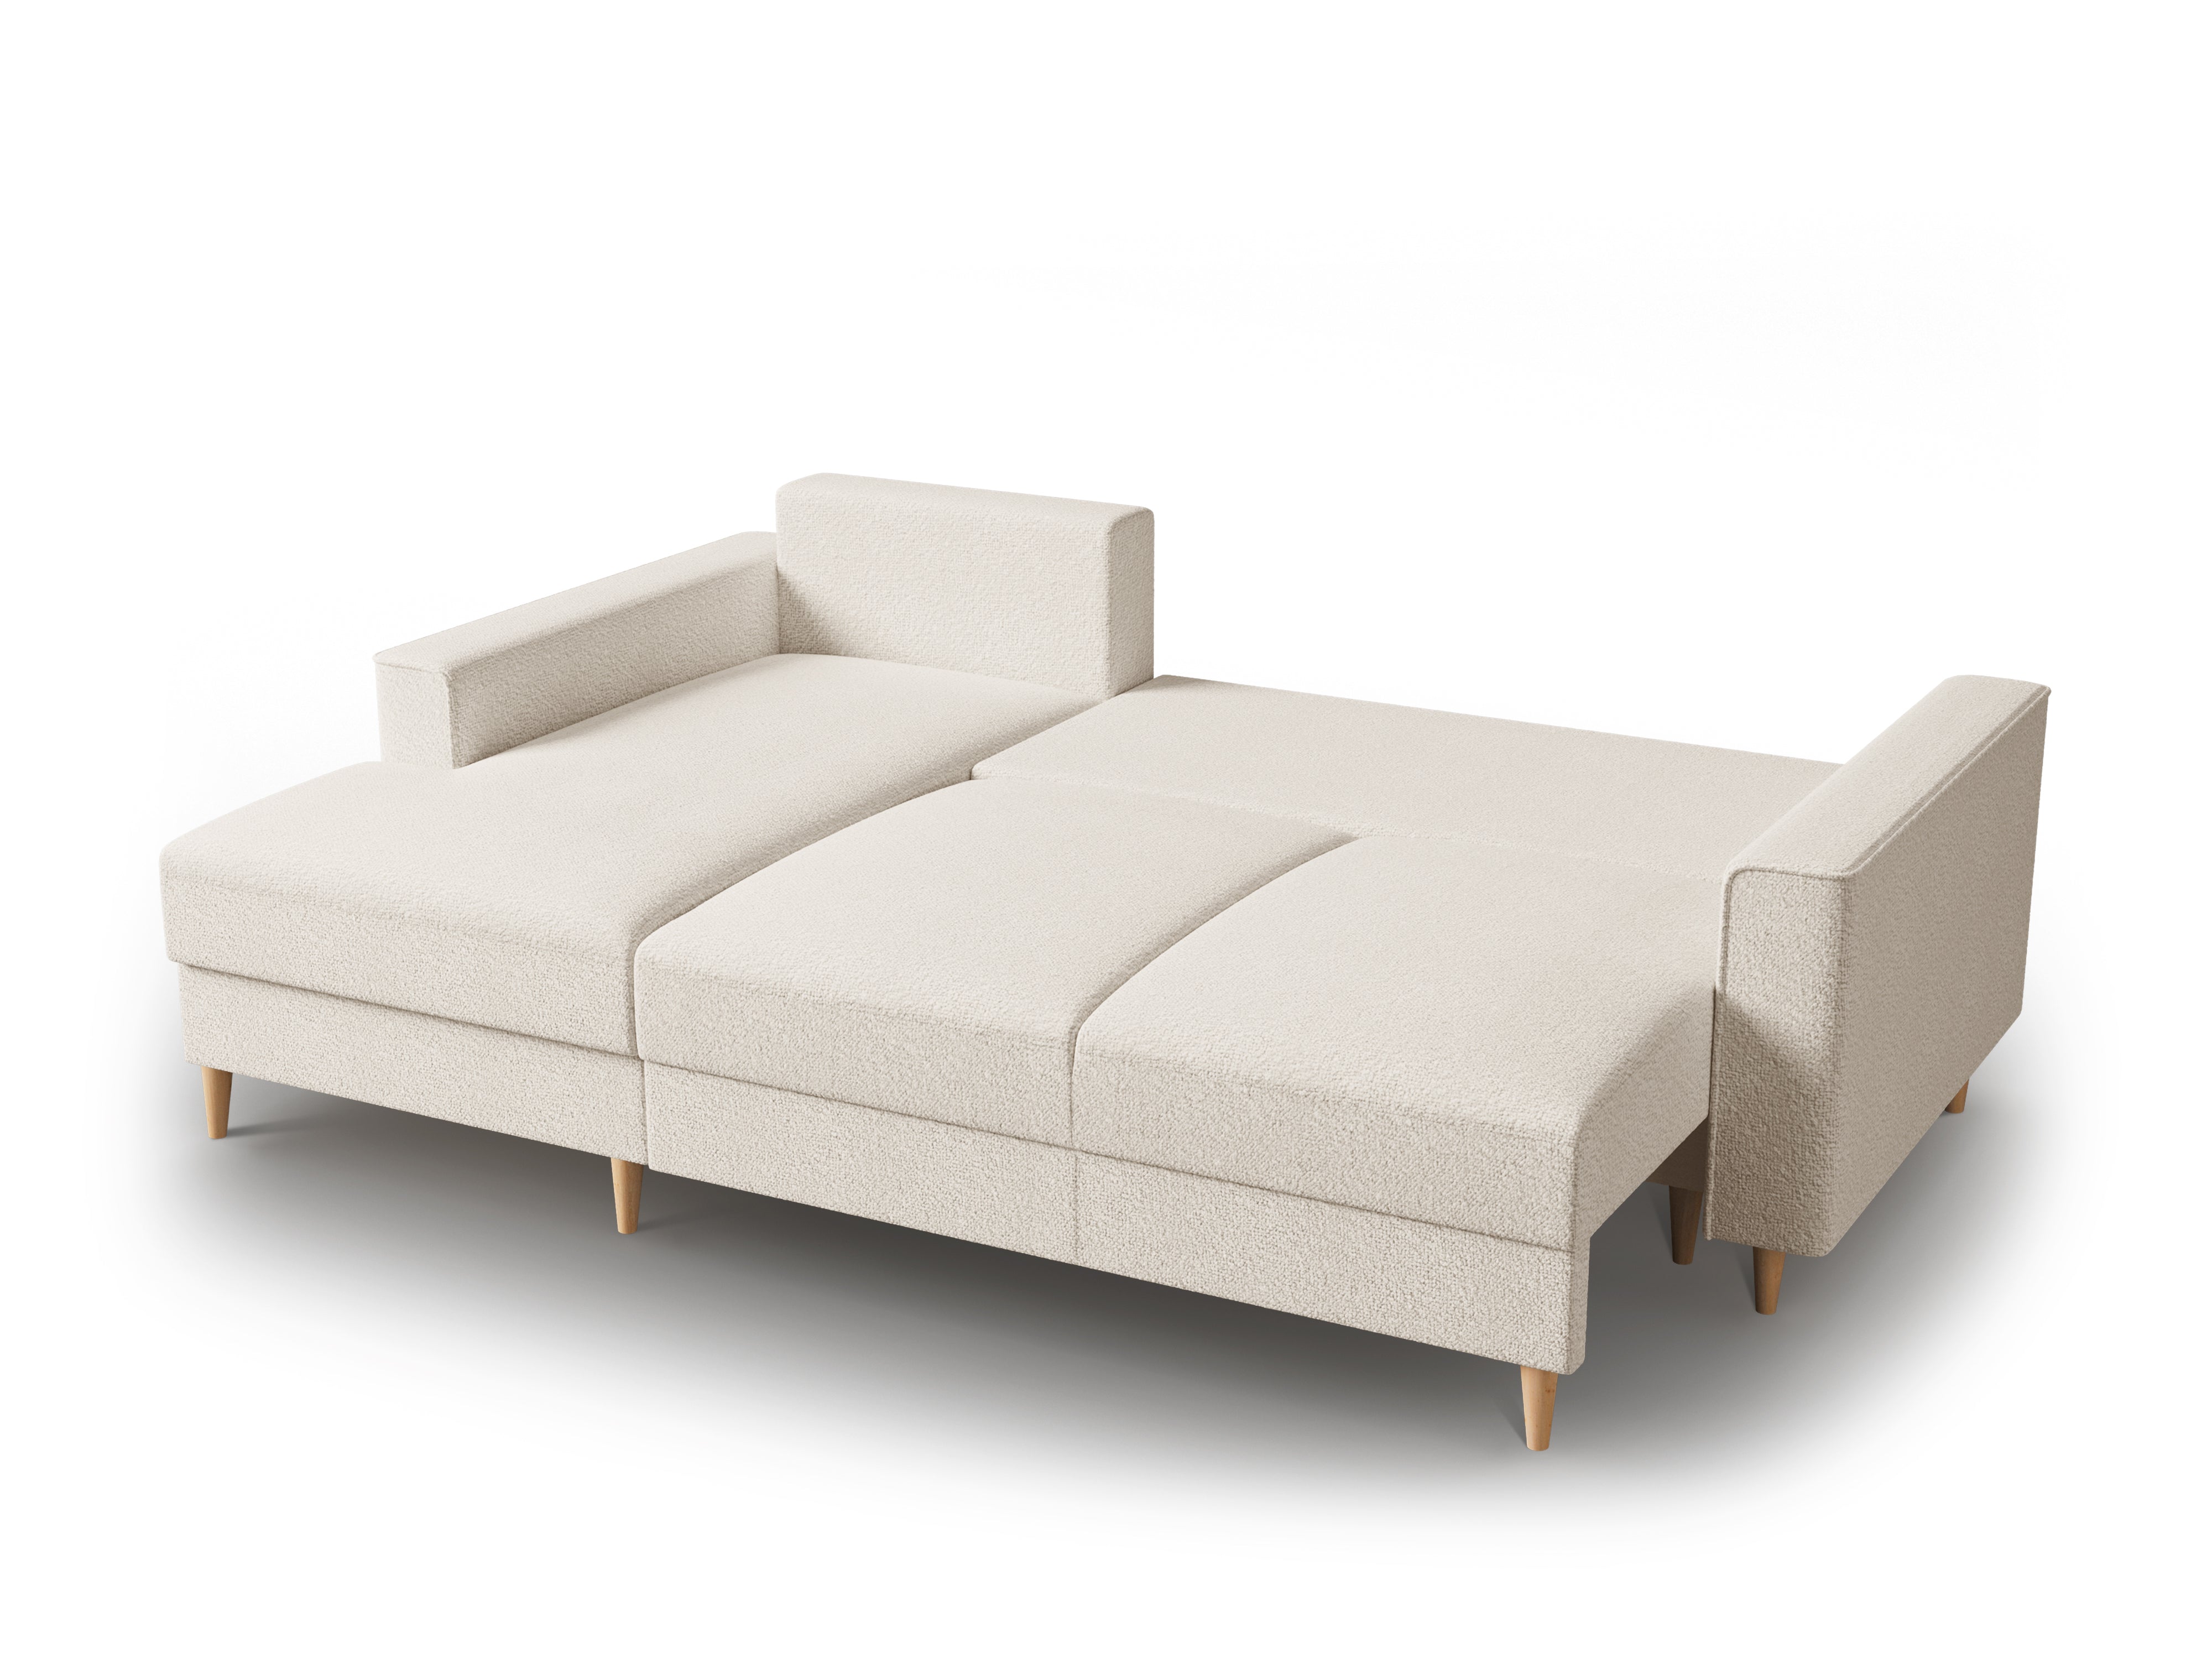 Boucle Left Corner Sofa With Bed Function And Box, "Cartadera", 4 Seats, 225x147x90
Made in Europe, Mazzini Sofas, Eye on Design